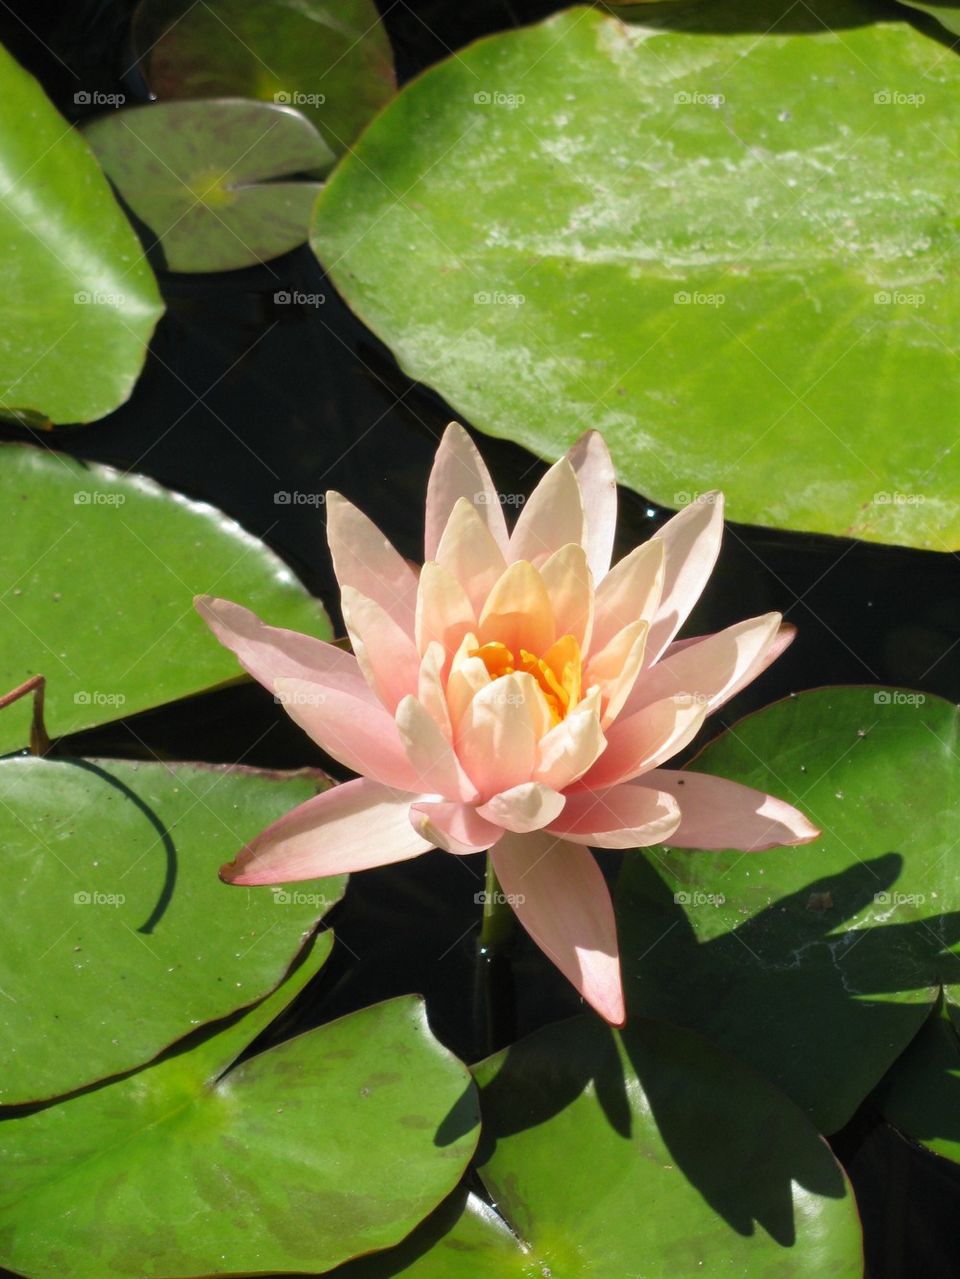 Lily pad with light pink flower